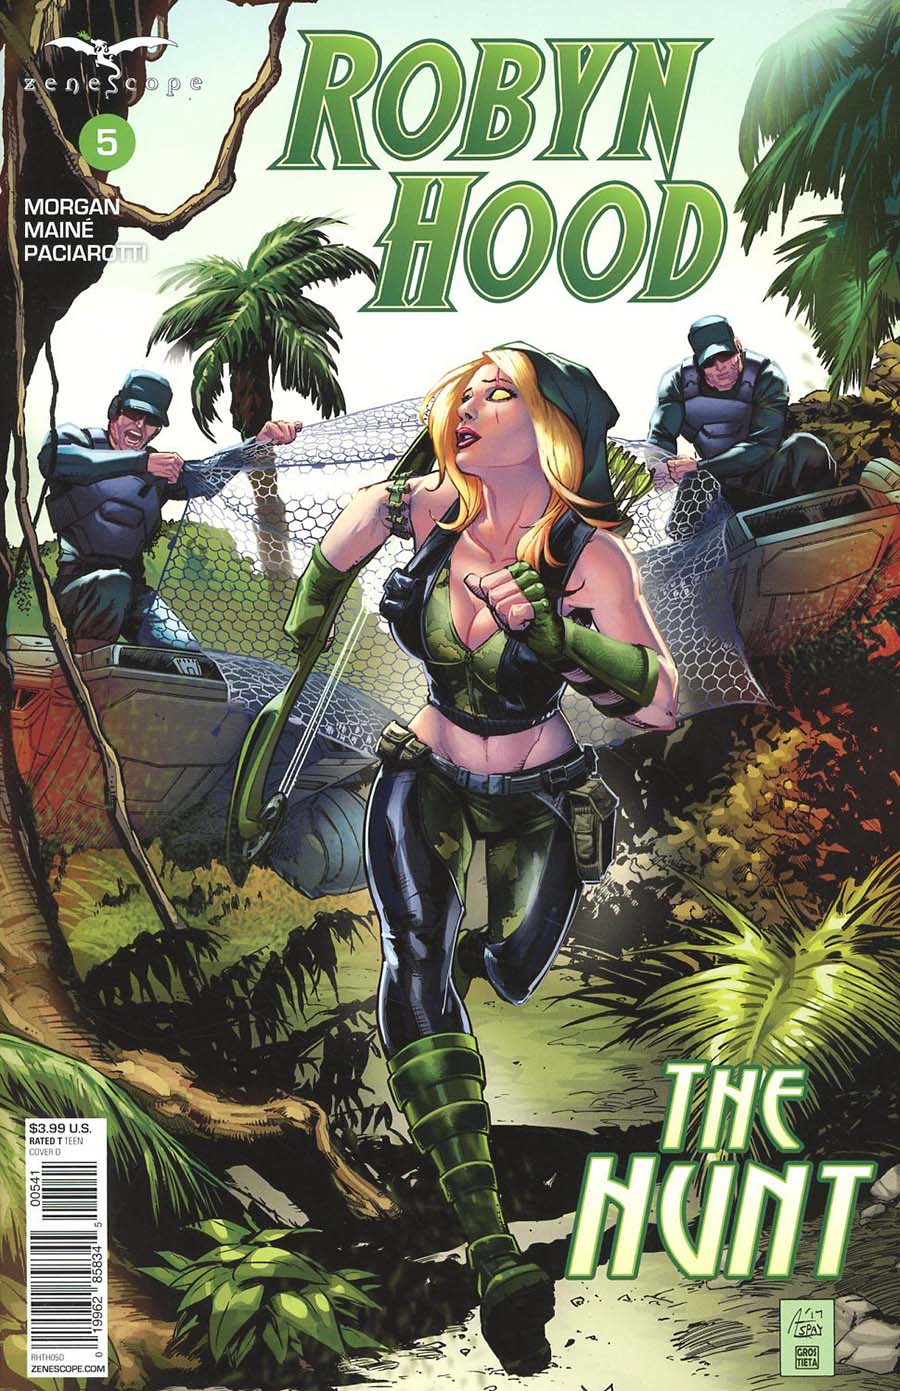 Grimm Fairy Tales Presents Robyn Hood The Hunt #5 Cover D Anthony Spay